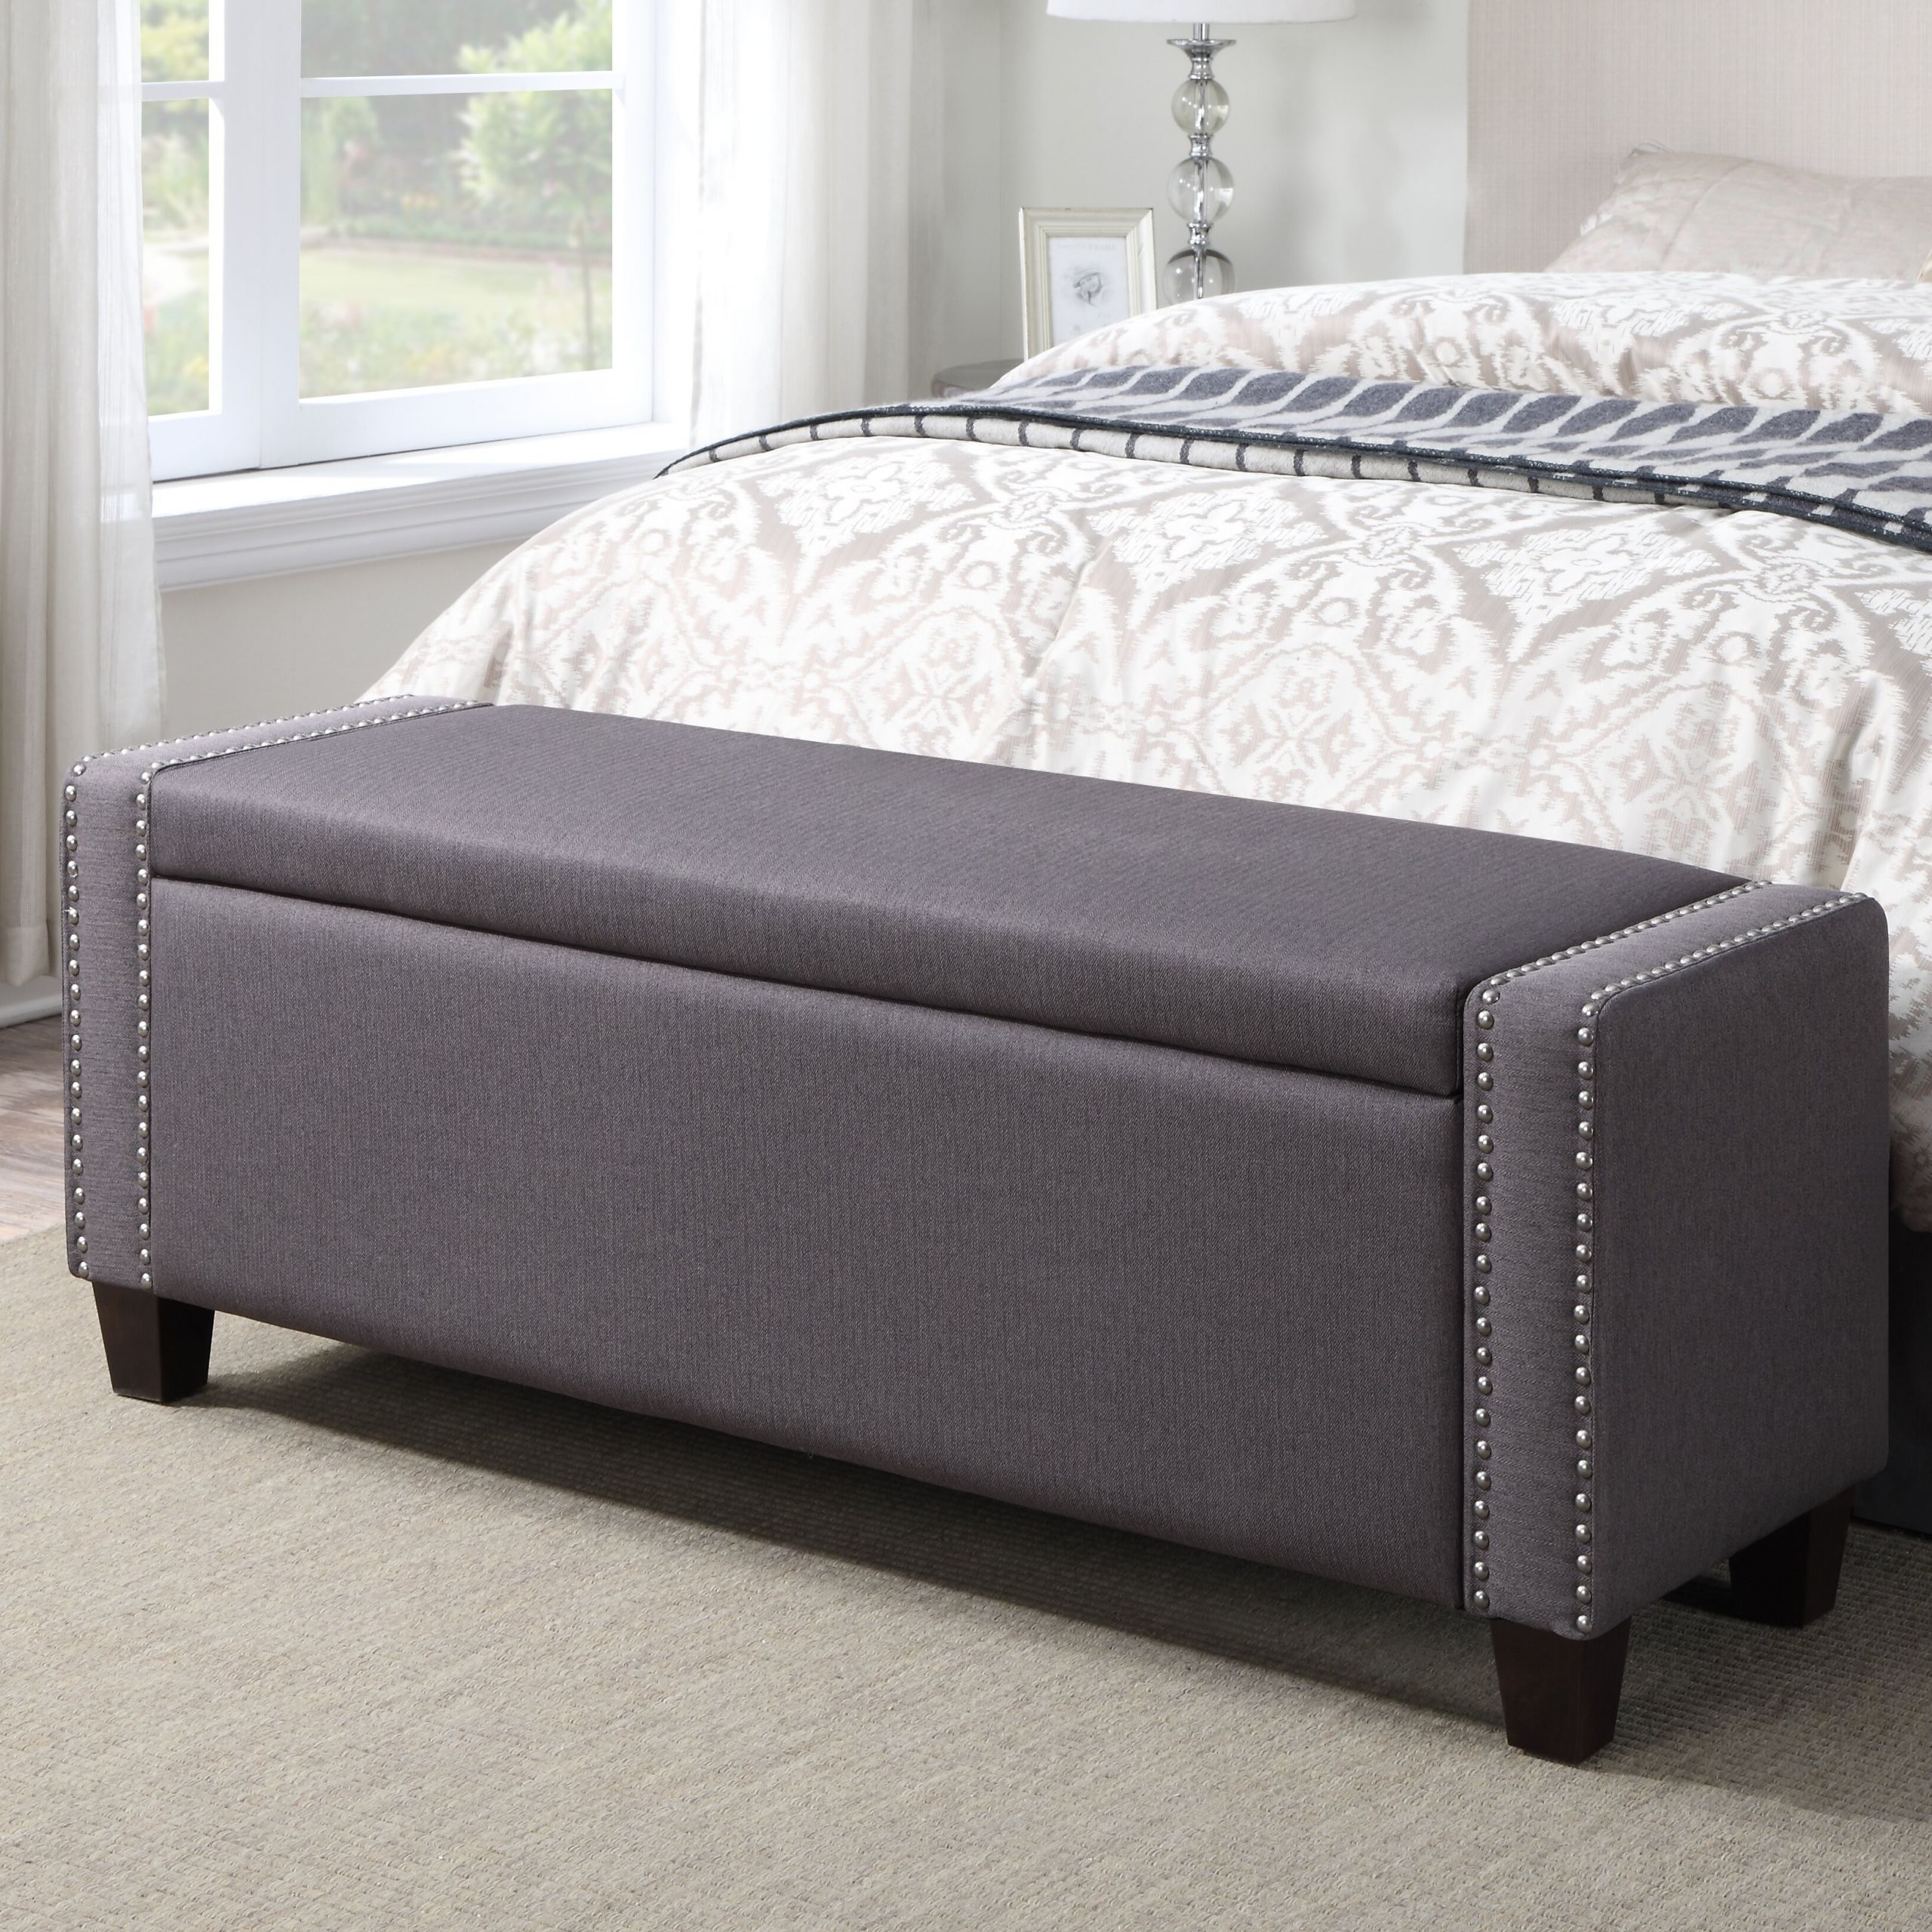 Storage Benches For Bedroom
 House of Hampton Gistel Upholstered Storage Bedroom Bench